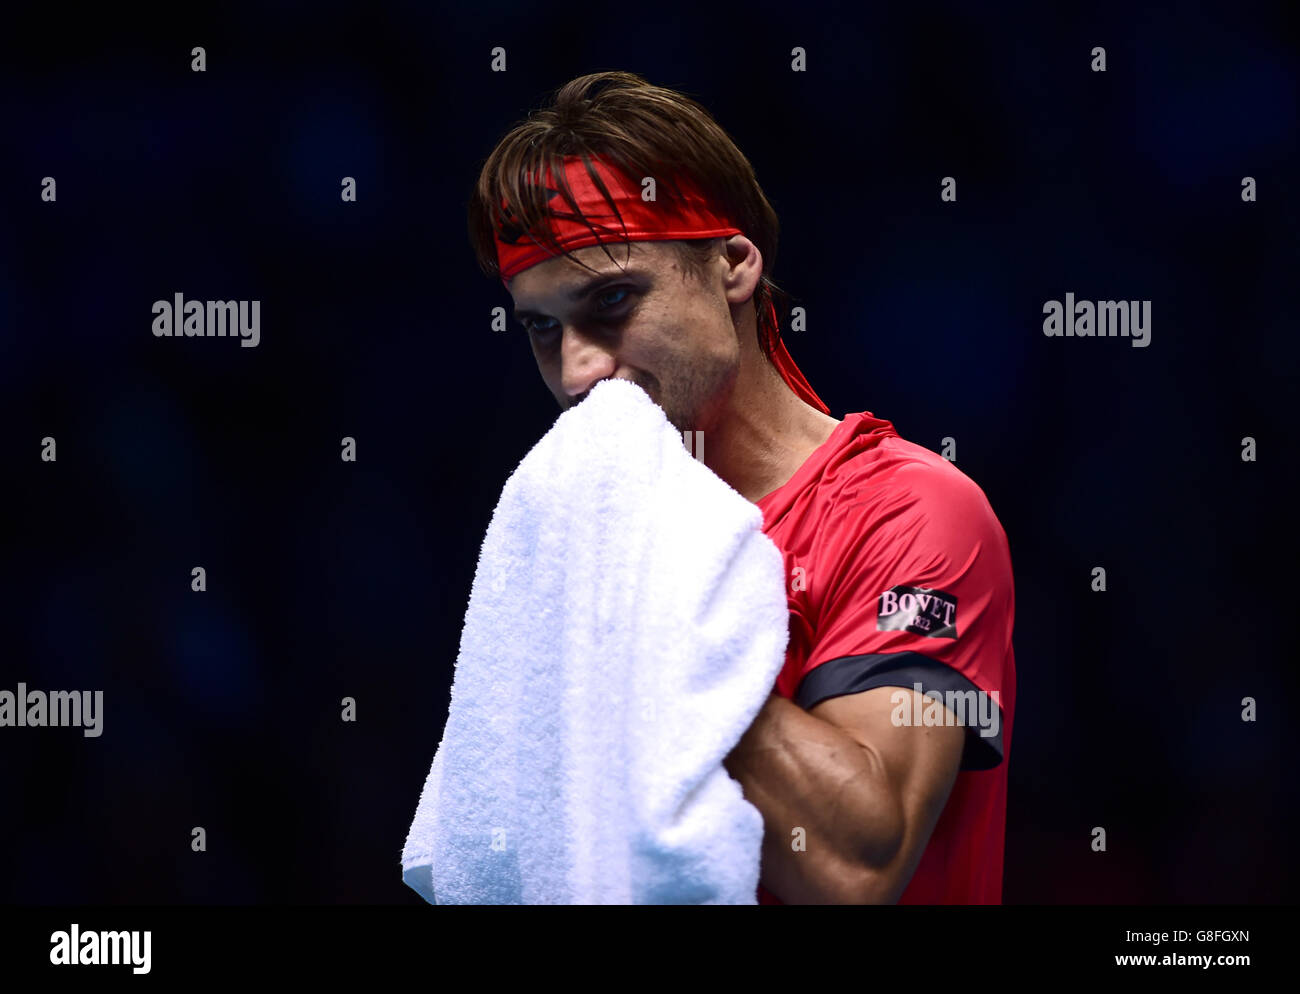 Spain's David Ferrer after losing the first set during day four of the ATP World Tour Finals at the O2 Arena, London. PRESS ASSSOCIATION Photo. Picture date: Wednesday November 18, 2015. See PA story TENNIS London. Photo credit should read: Adam Davy/PA Wire. Stock Photo